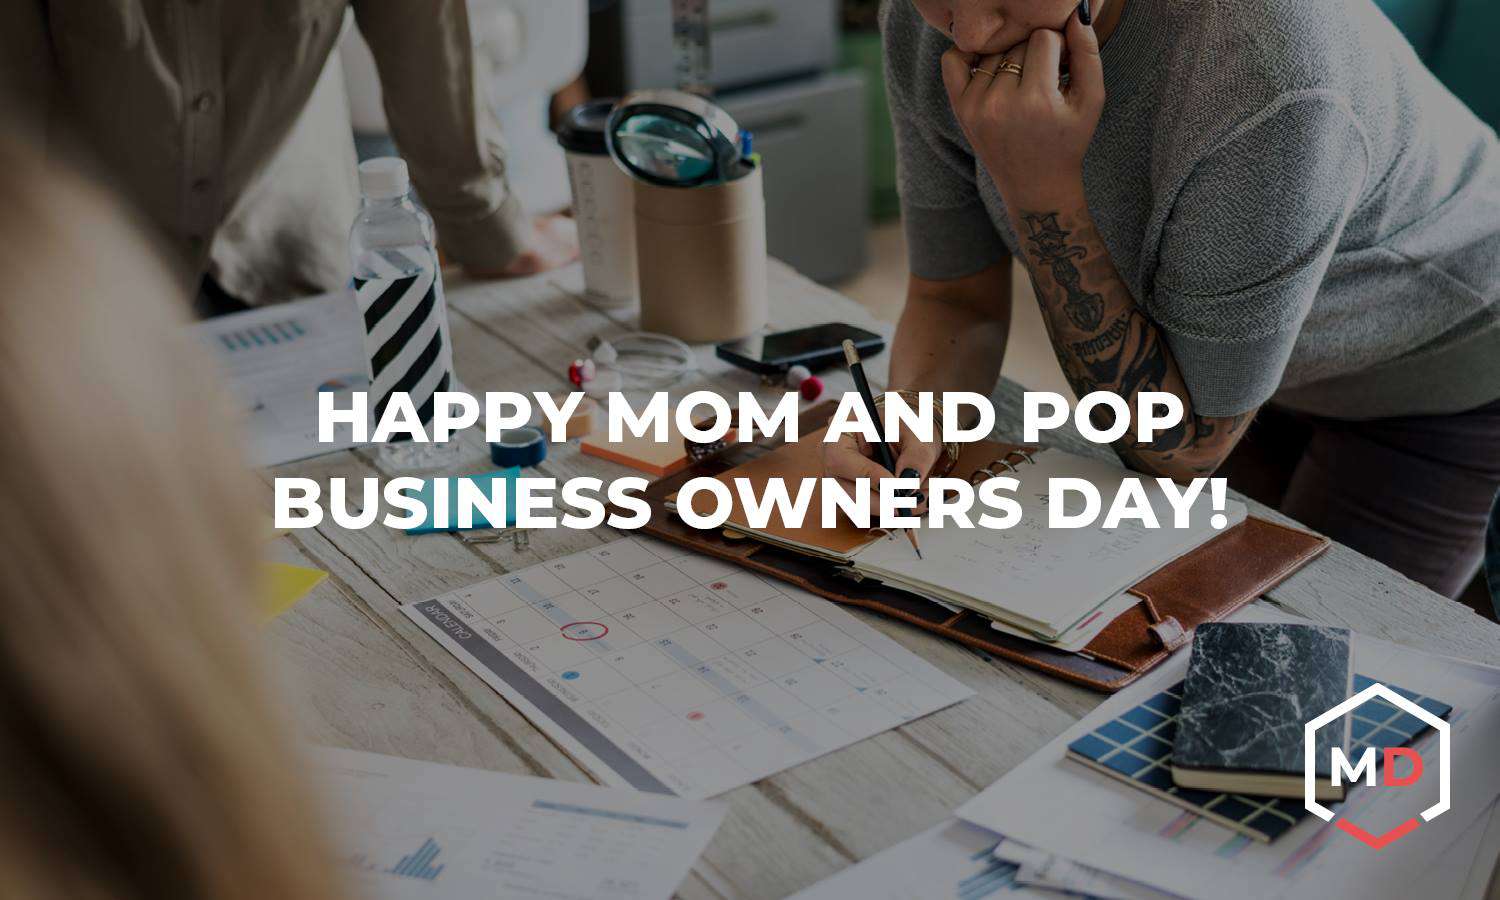 National Mom and Pop Business Owners Day Wishes Images